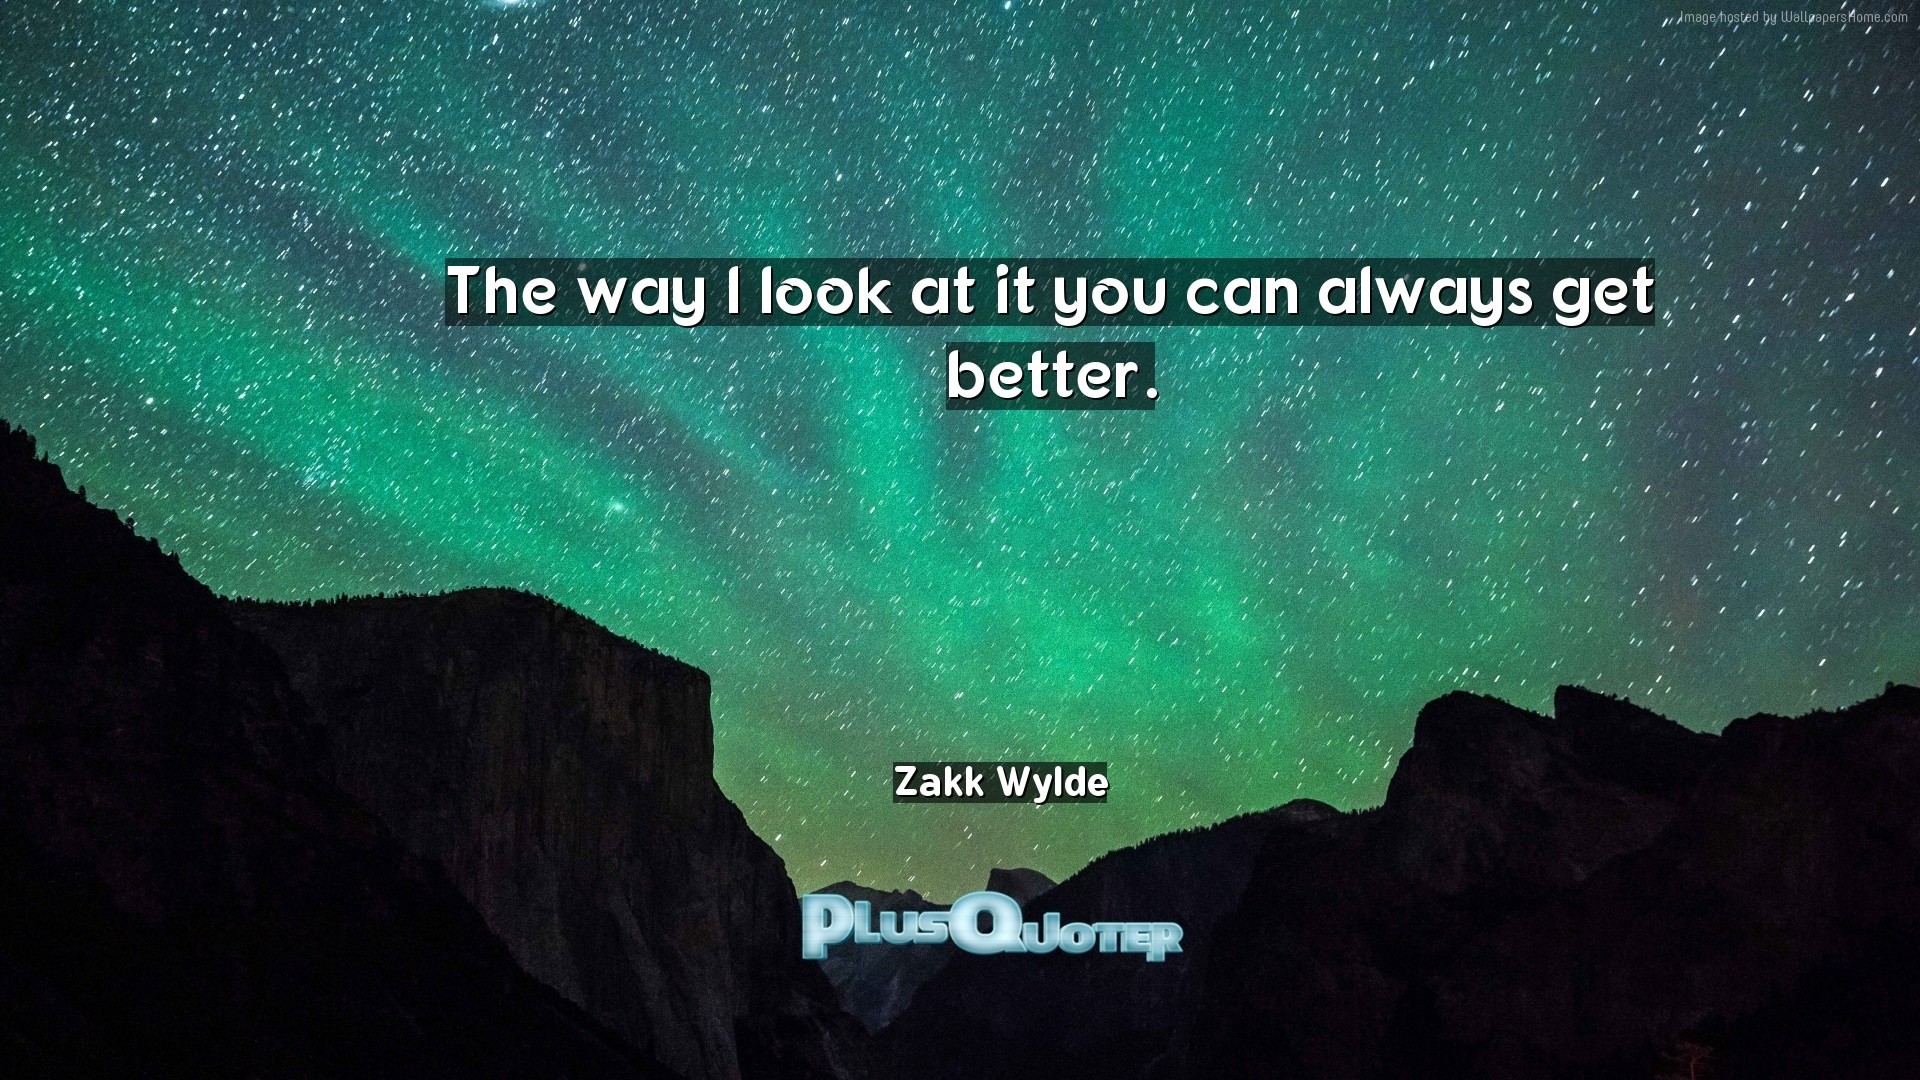 1920x1080 Download Wallpaper with inspirational Quotes- "The way I look at it you can  always